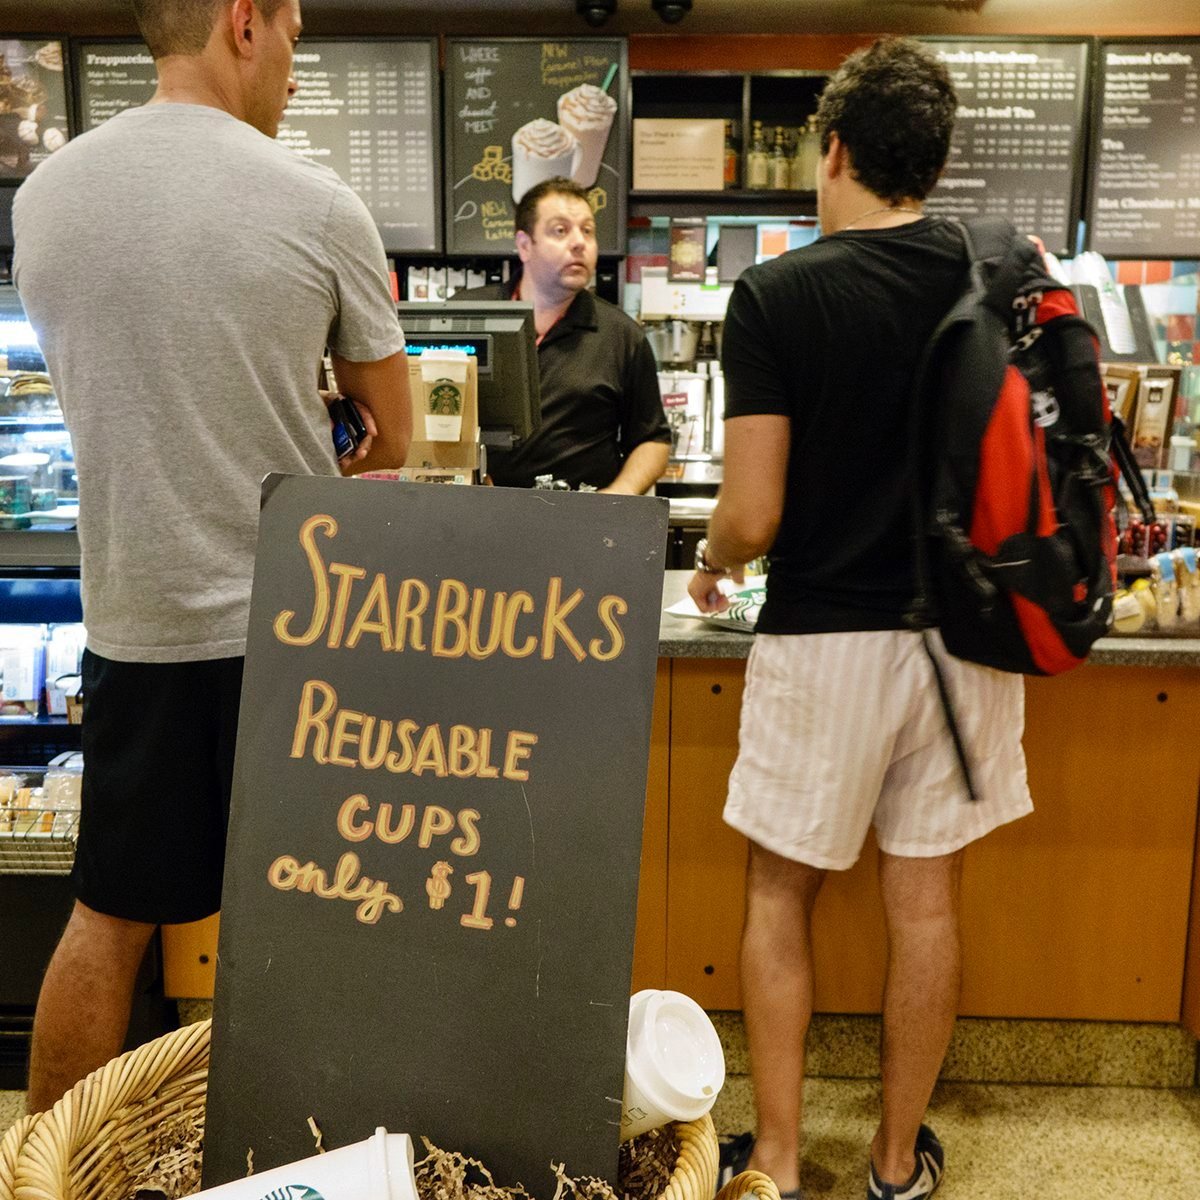 Interior of Starbucks Coffee with customers standing at the counter behind reusable cups sign. (Photo by: Jeffrey Greenberg/Universal Images Group via Getty Images)